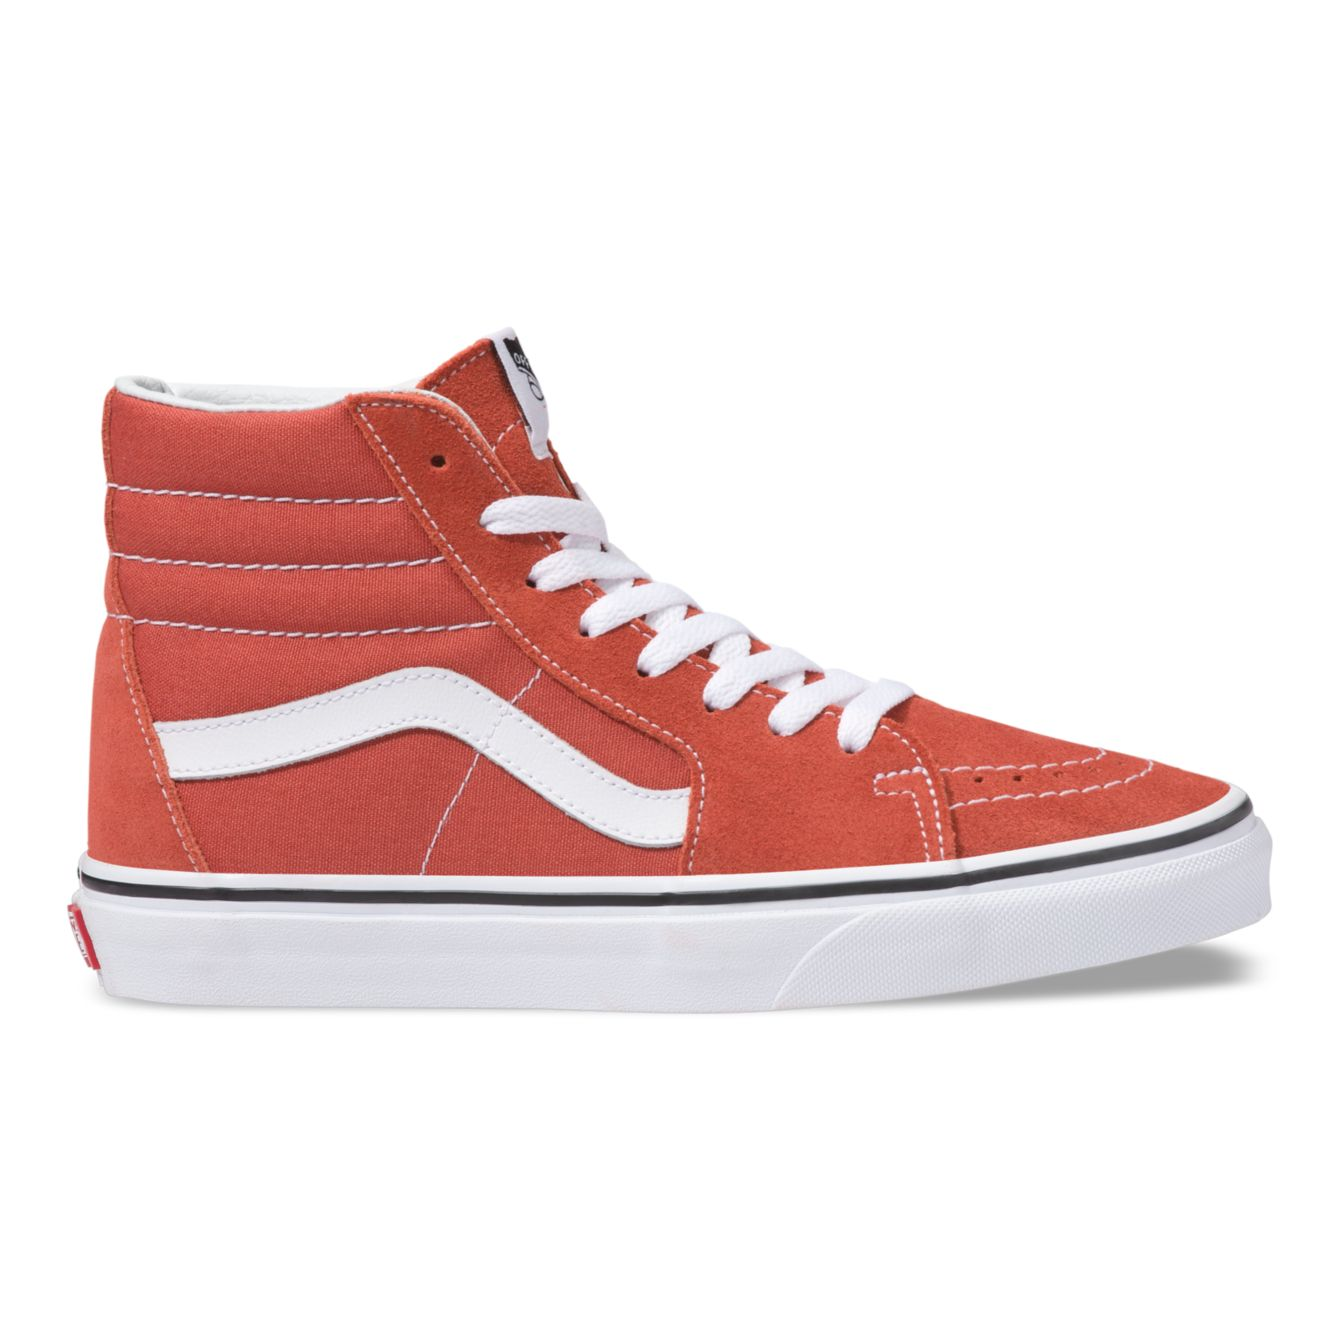 red high top vans outfit